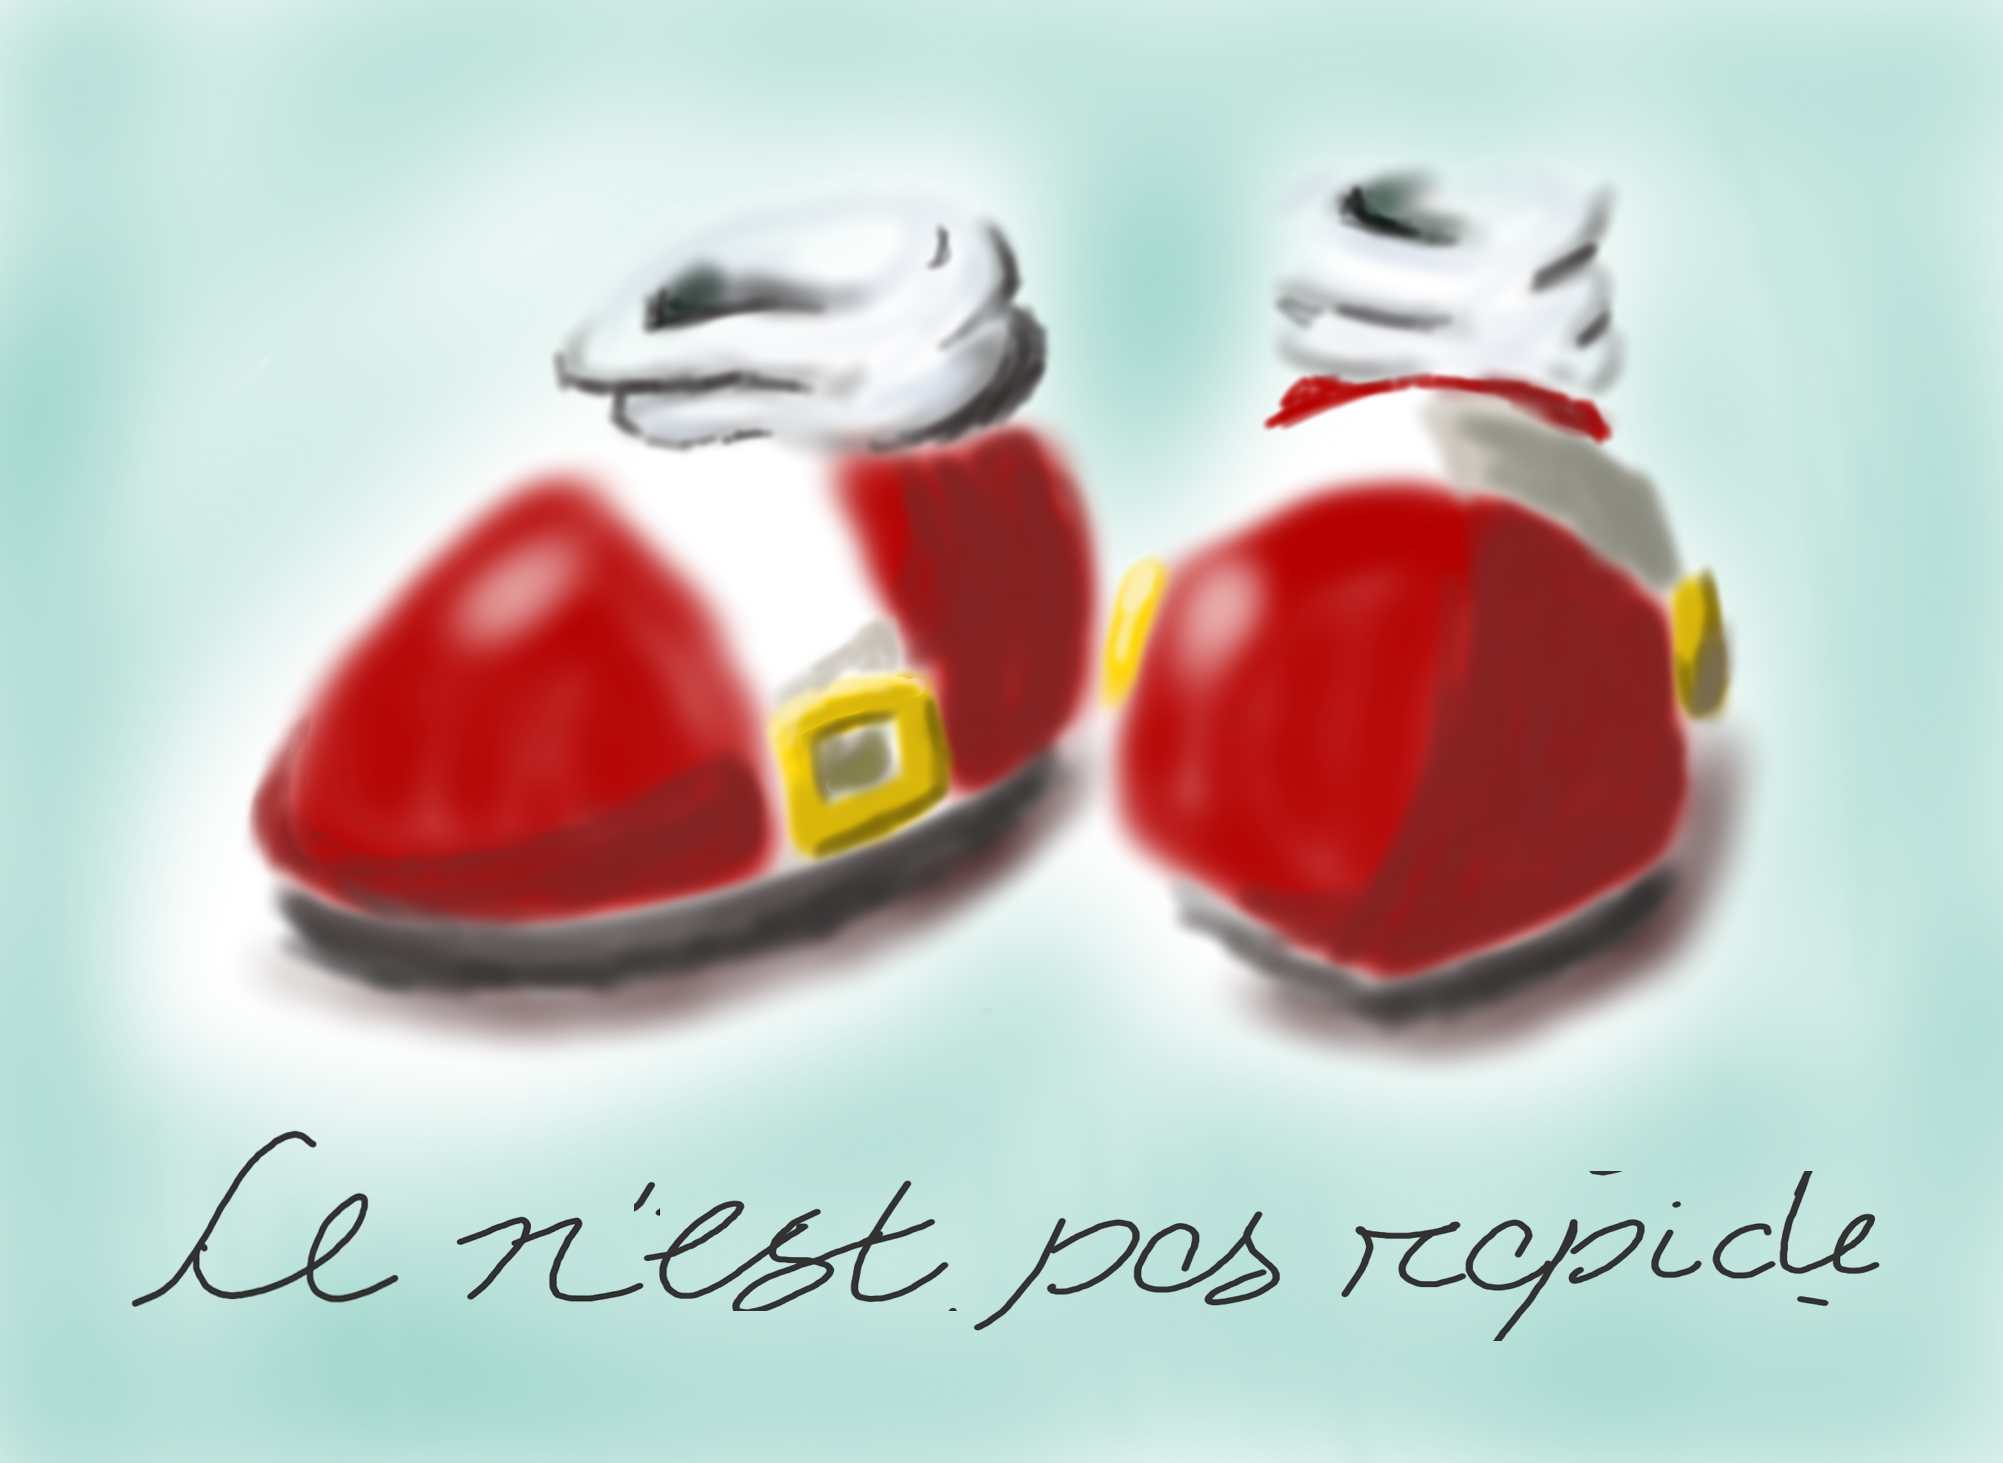 a digital painting of Sonic the Hedgehog's shoes with a very soft (almost airbrushed) quality. The text below reads "ce n'est pas rapide"